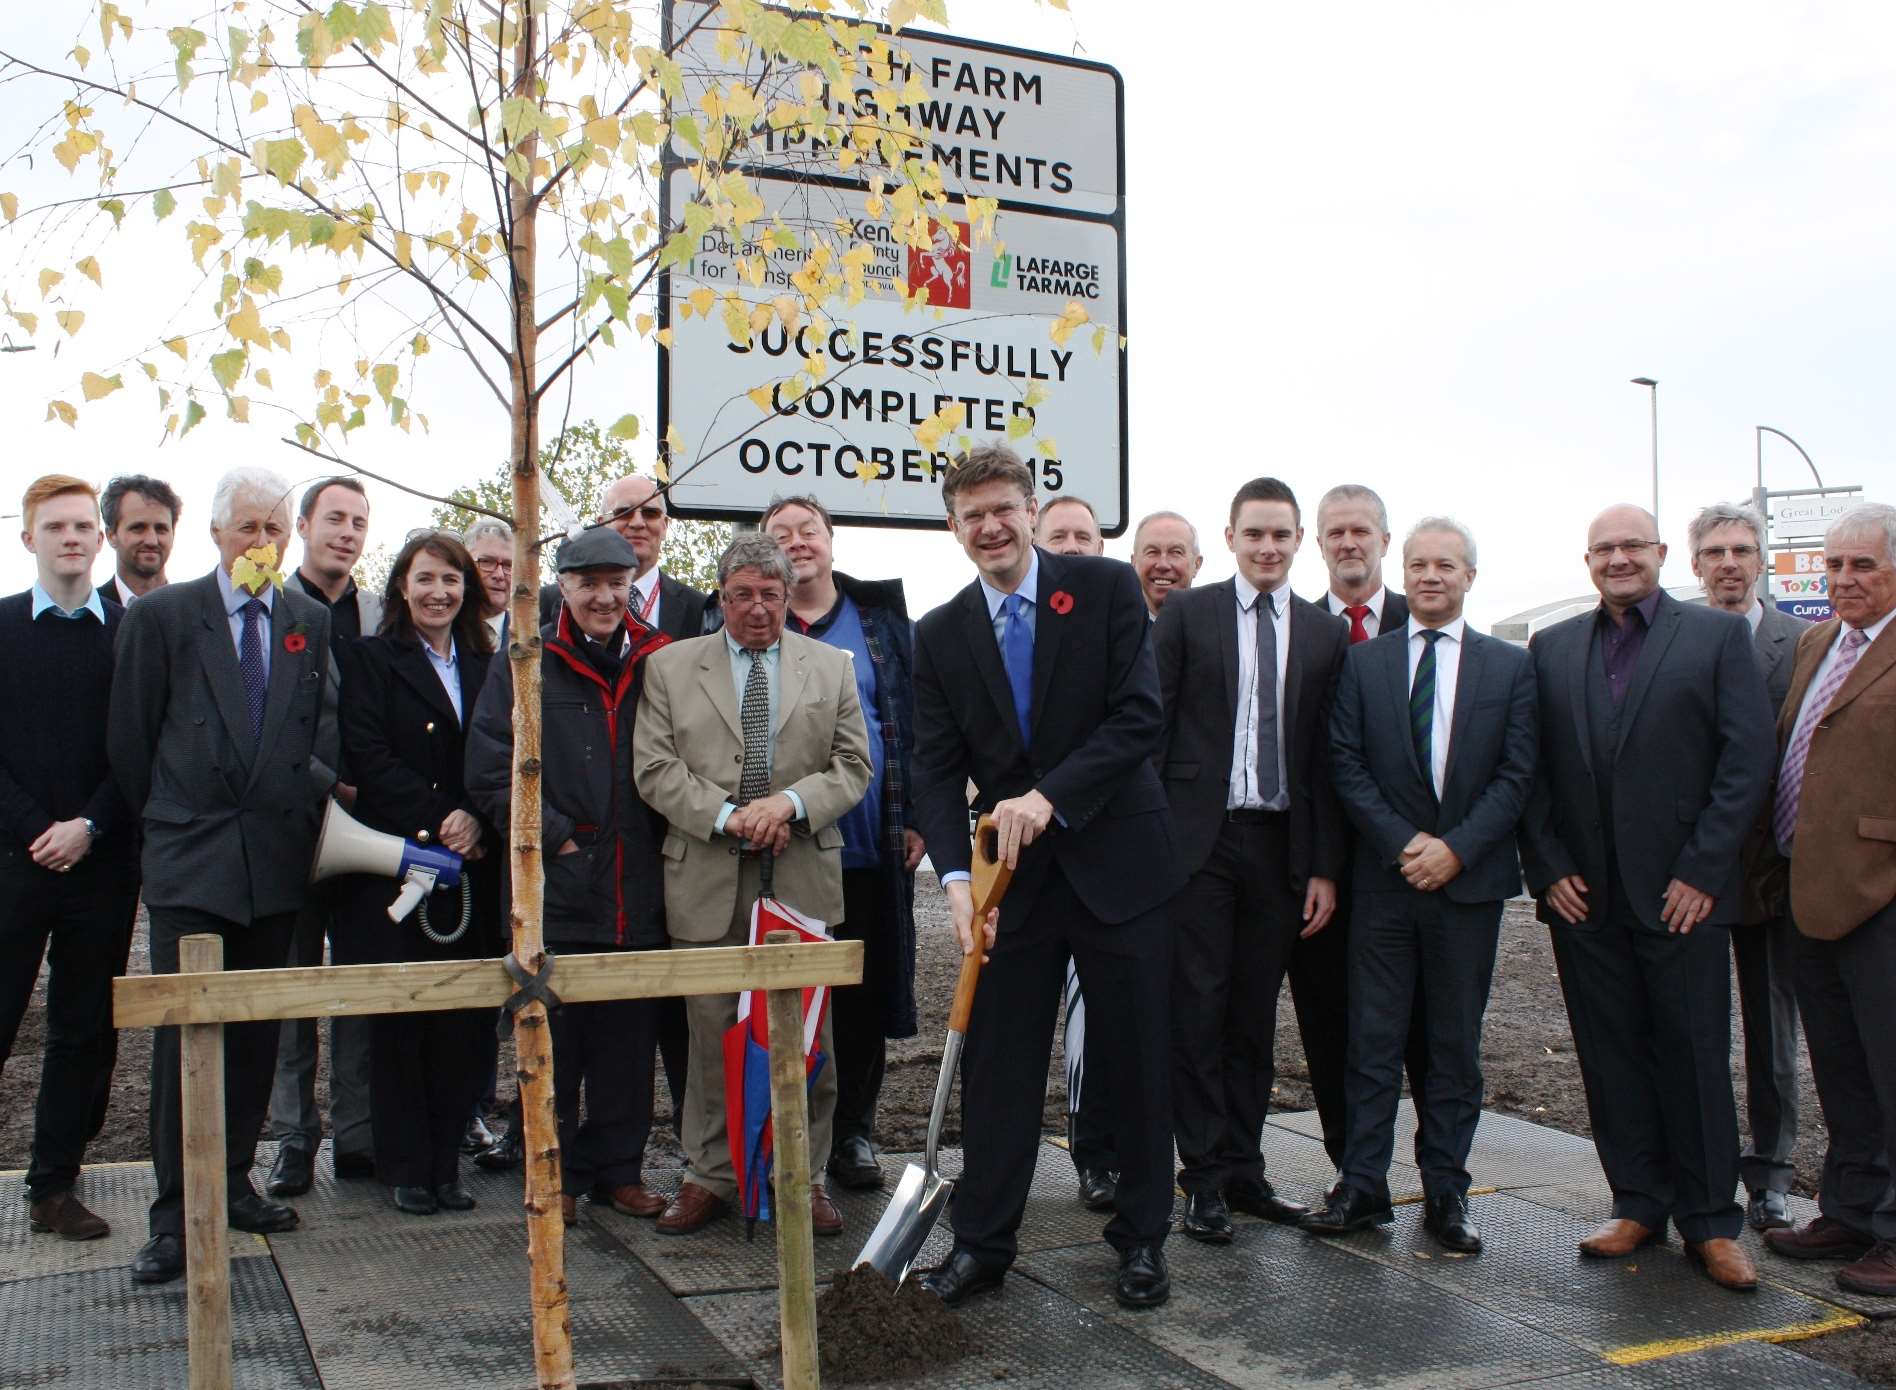 Tunbridge Wells MP Greg Clark, local politicians and business leaders officially marked the opening of the multi-million pound congestion-busting Longfield Road Improvement Scheme